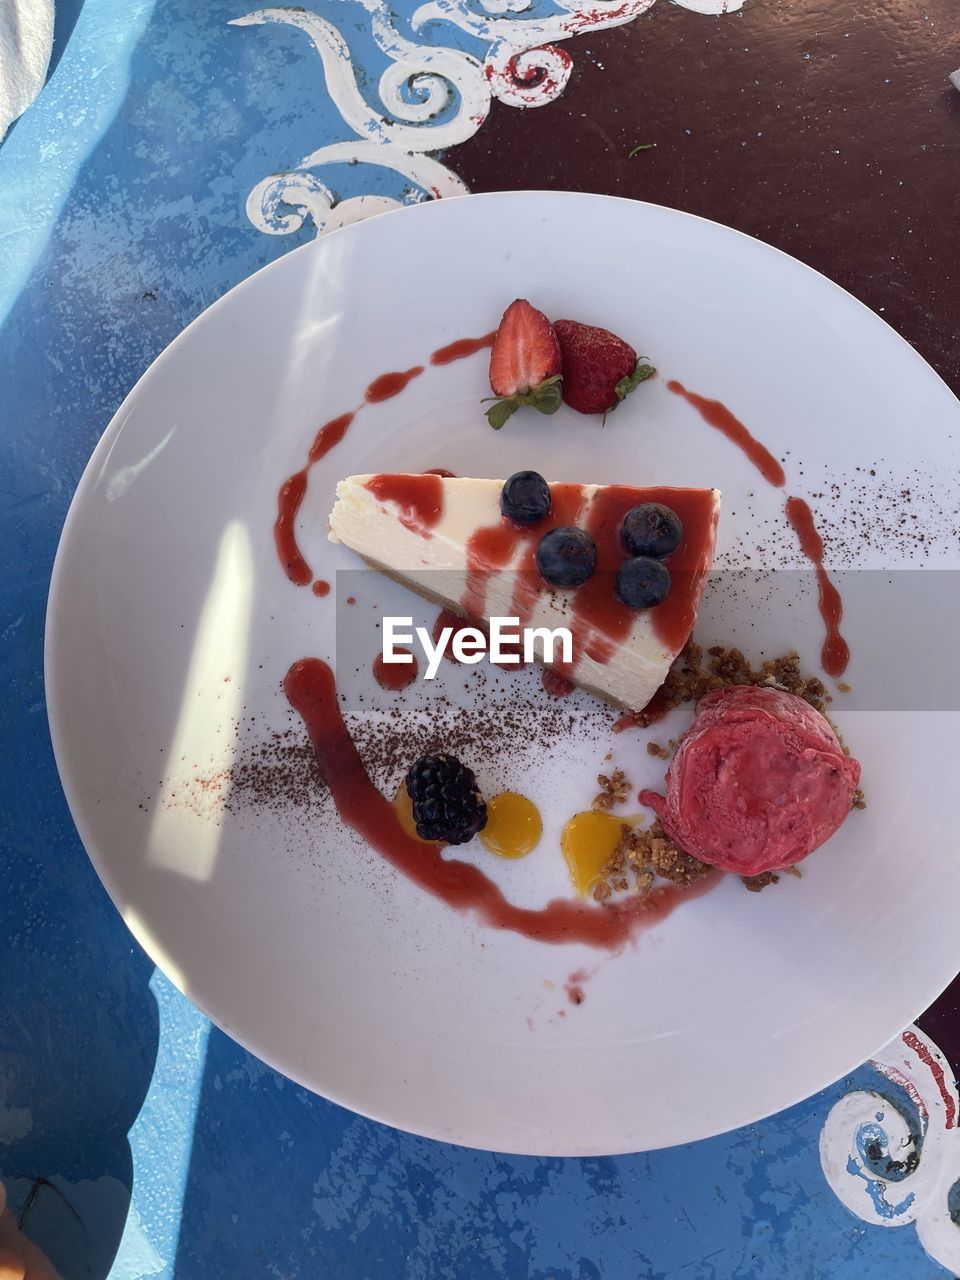 food, food and drink, plate, fruit, sweet food, freshness, sweet, berry, dessert, breakfast, high angle view, meal, table, healthy eating, no people, directly above, indoors, strawberry, still life, cake, produce, dairy, dish, blue